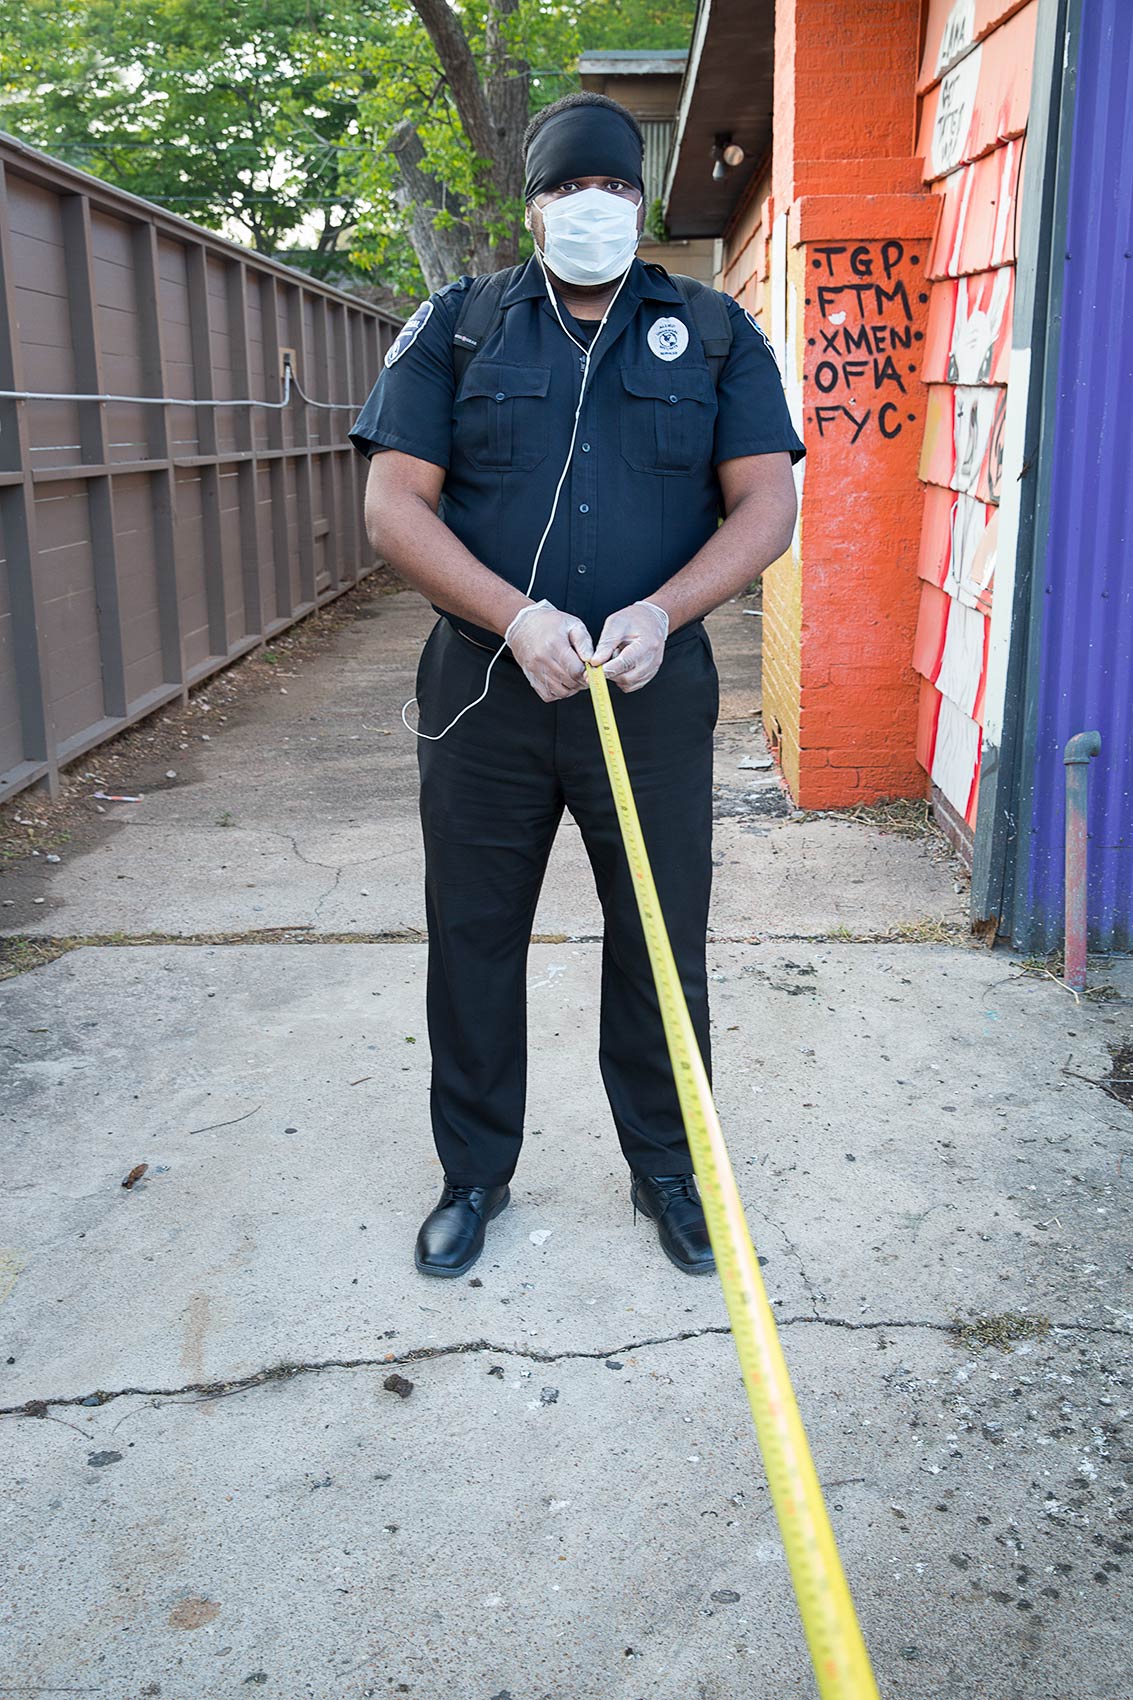 A masked security guard holds a long tape measure as a symbol of Covid-19 social distancing